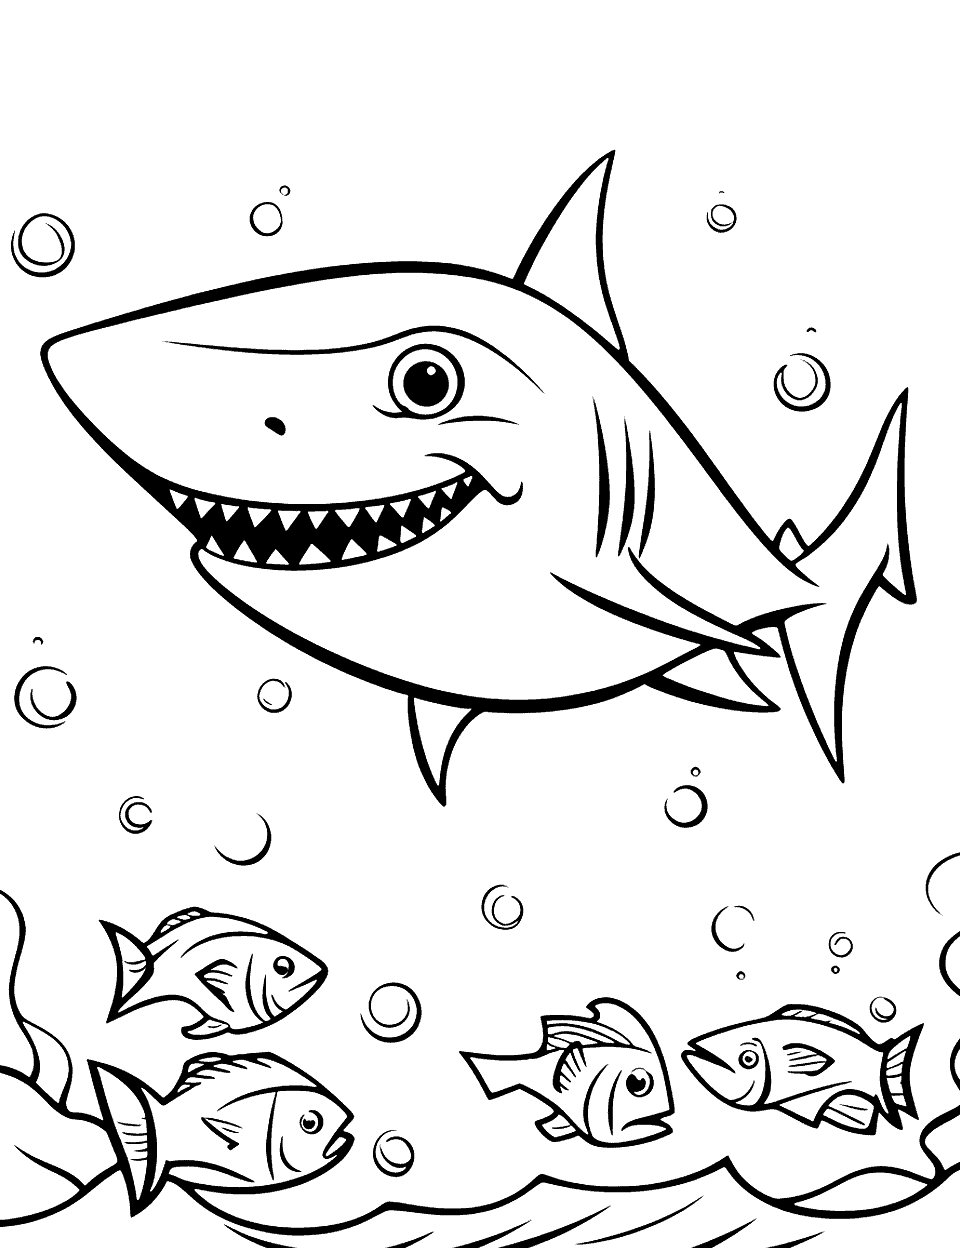 Happy Shark Coloring Page - A shark with a huge grin on its mouth.